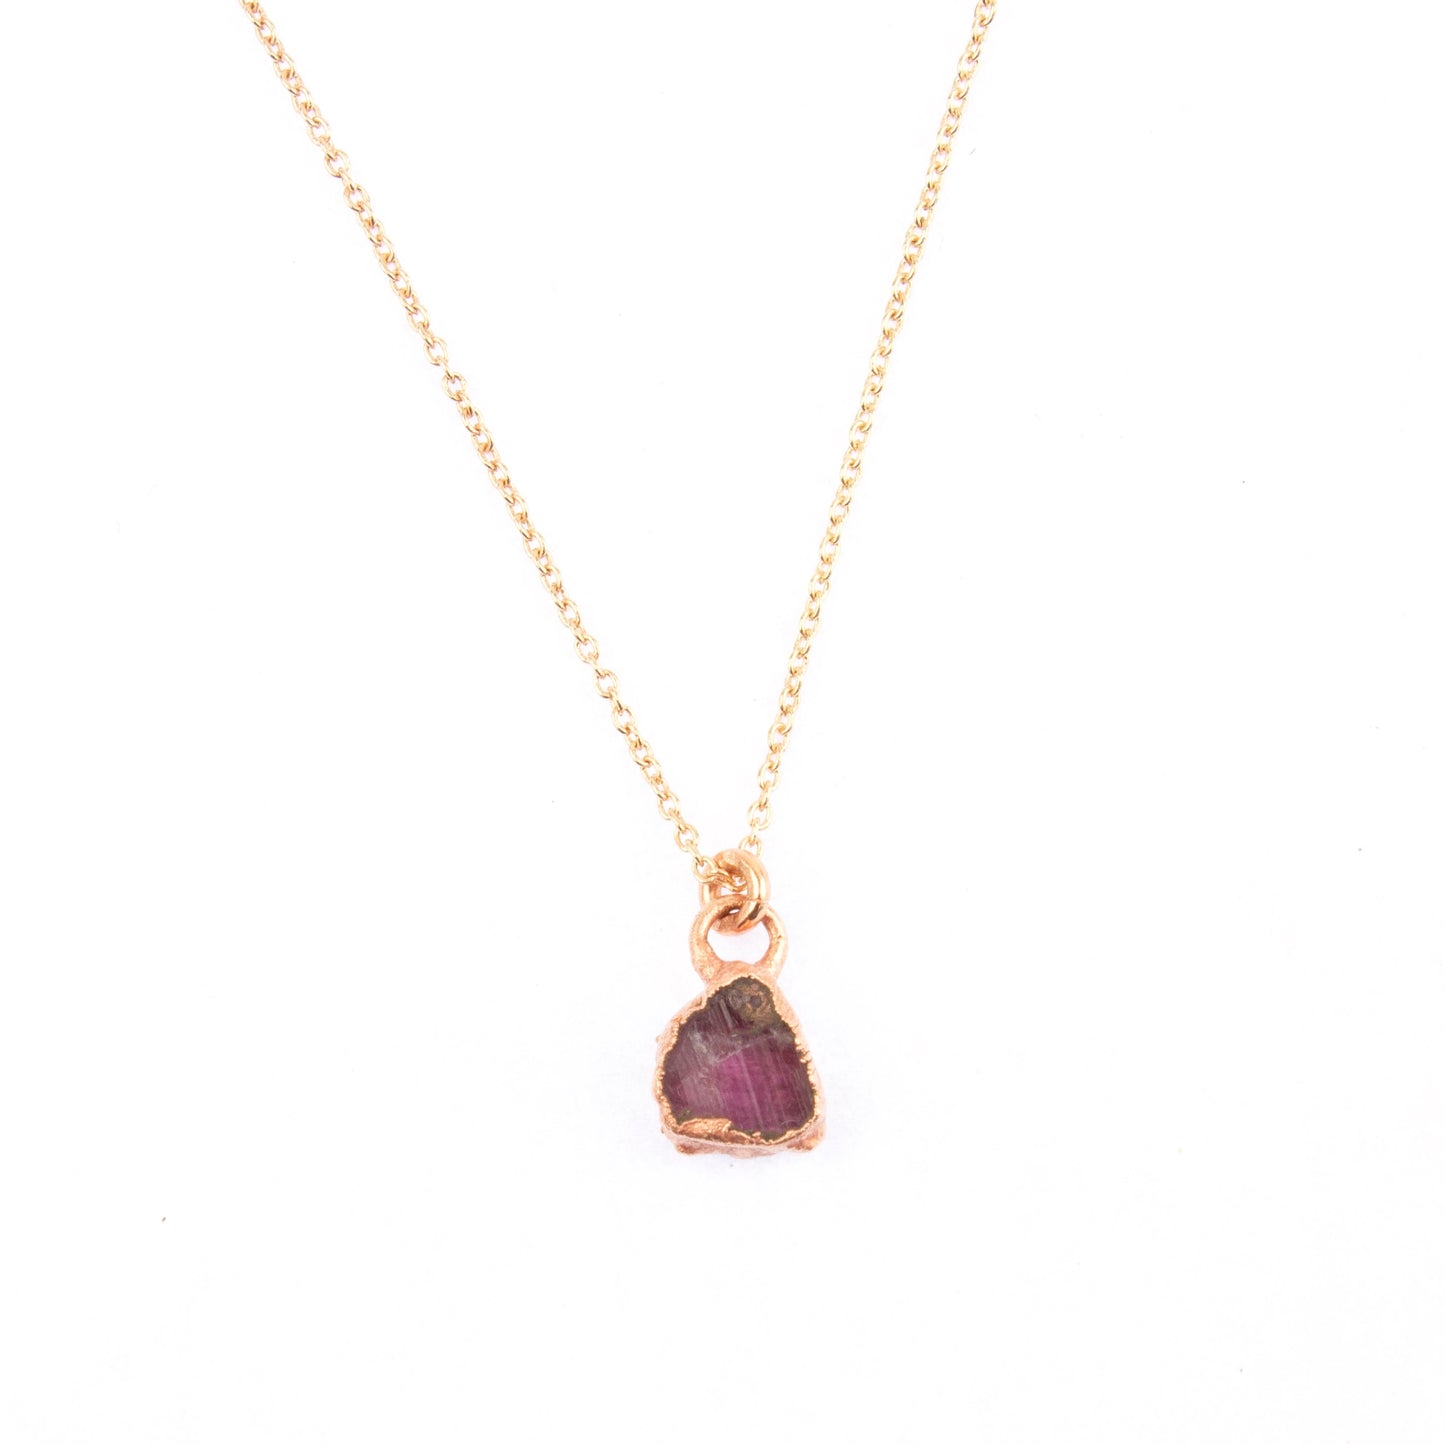 Small Pink Tourmaline Necklace (October Birthstone)